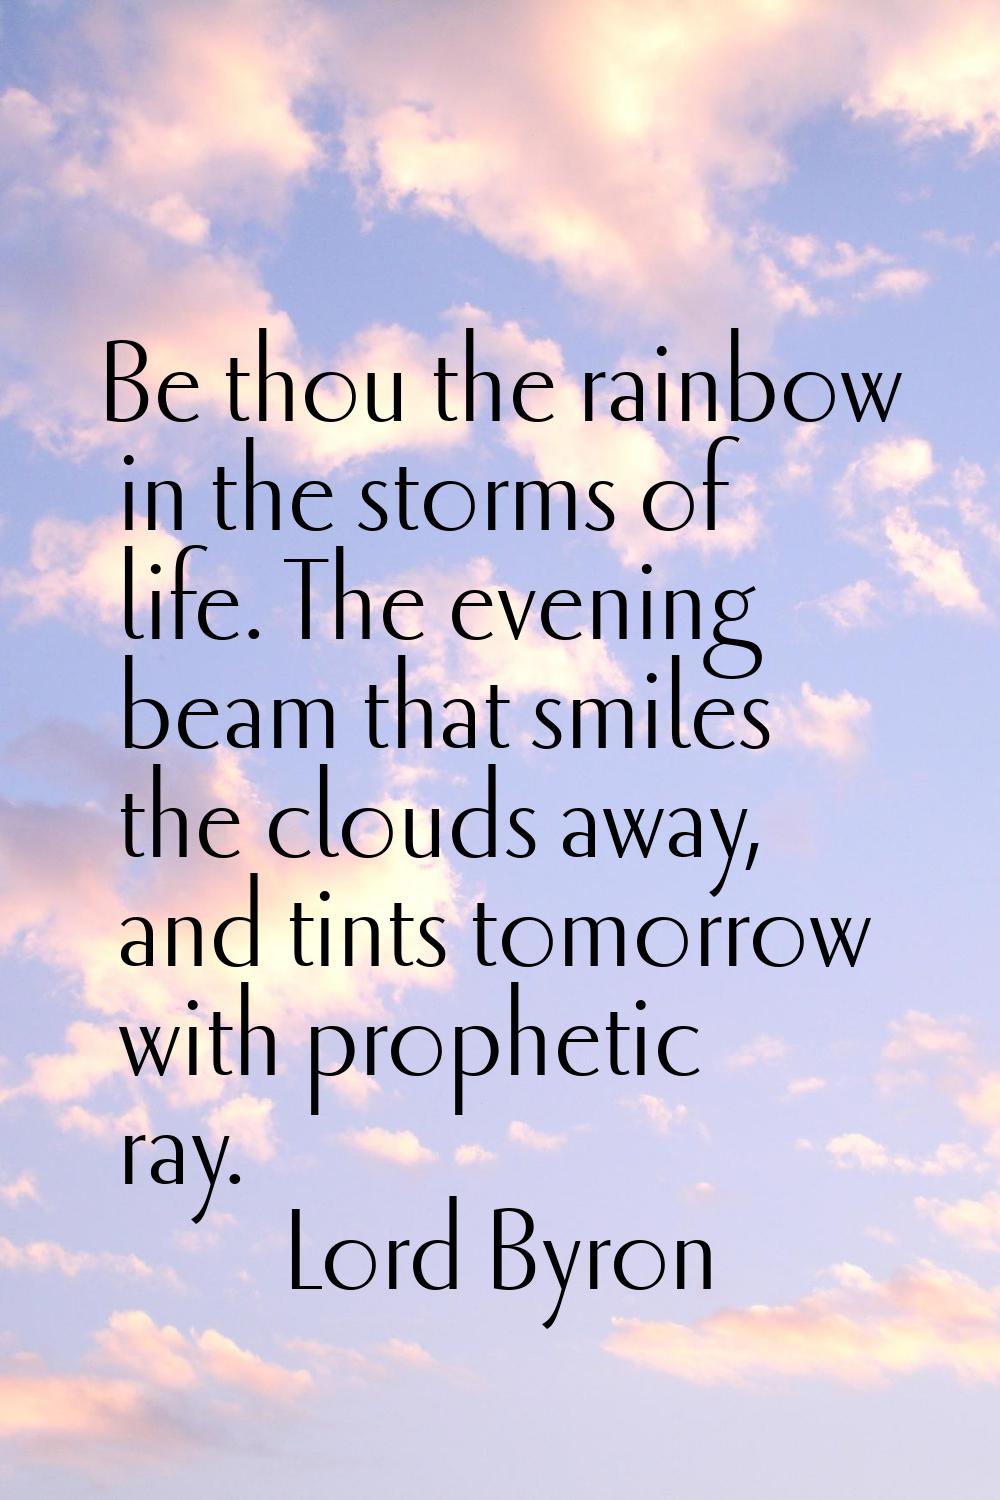 Be thou the rainbow in the storms of life. The evening beam that smiles the clouds away, and tints 